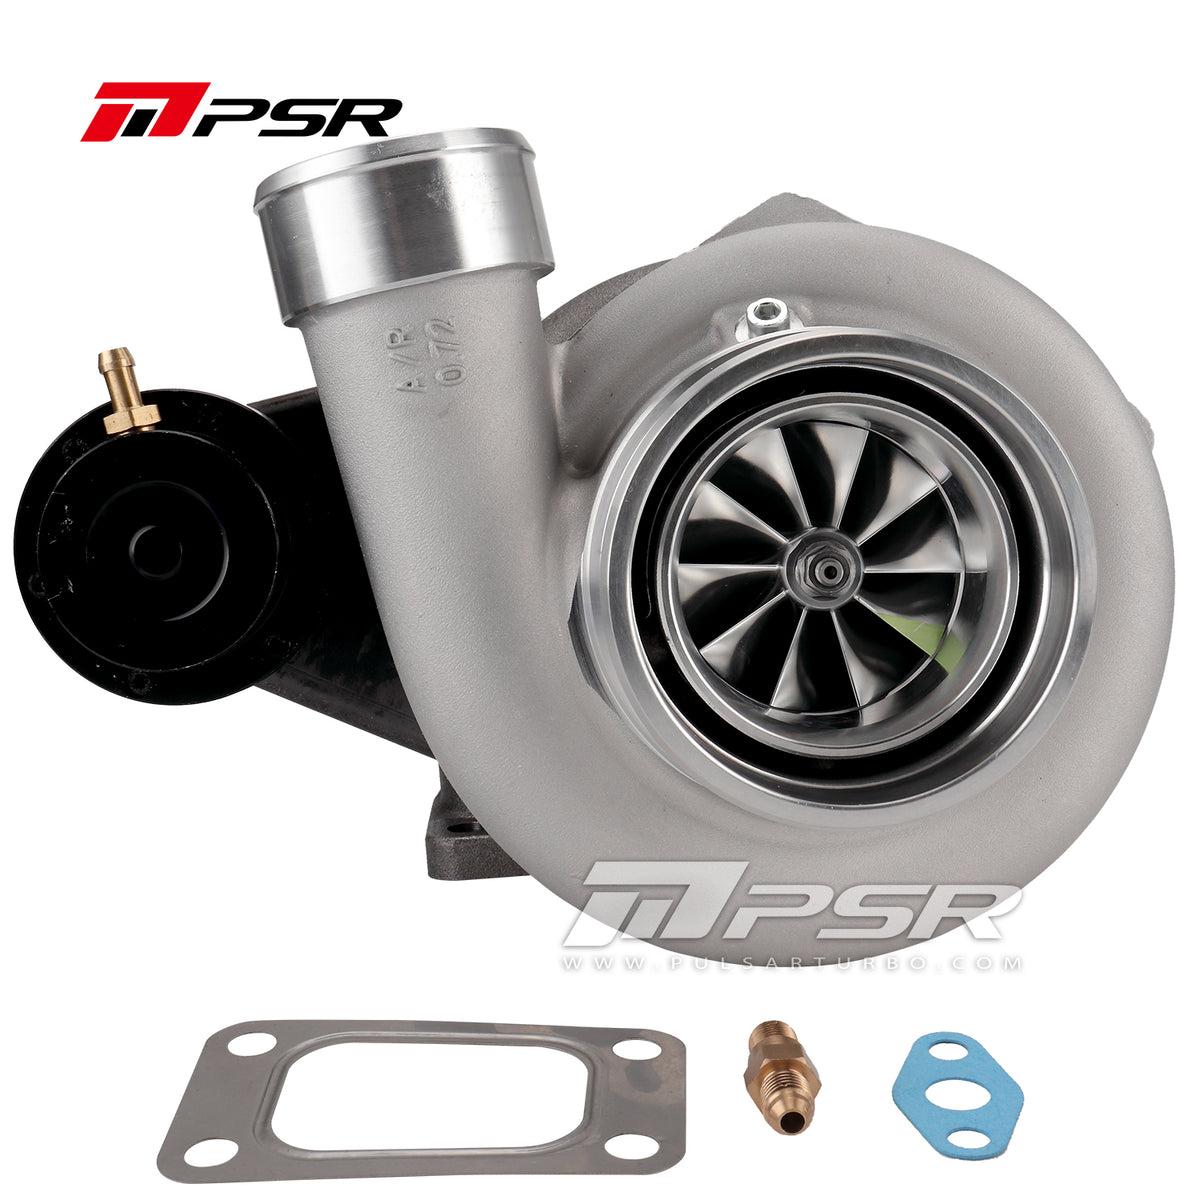 PSR PULSAR Next GEN 6782 for Ford Falcon to replace the factory GT3582R turbo